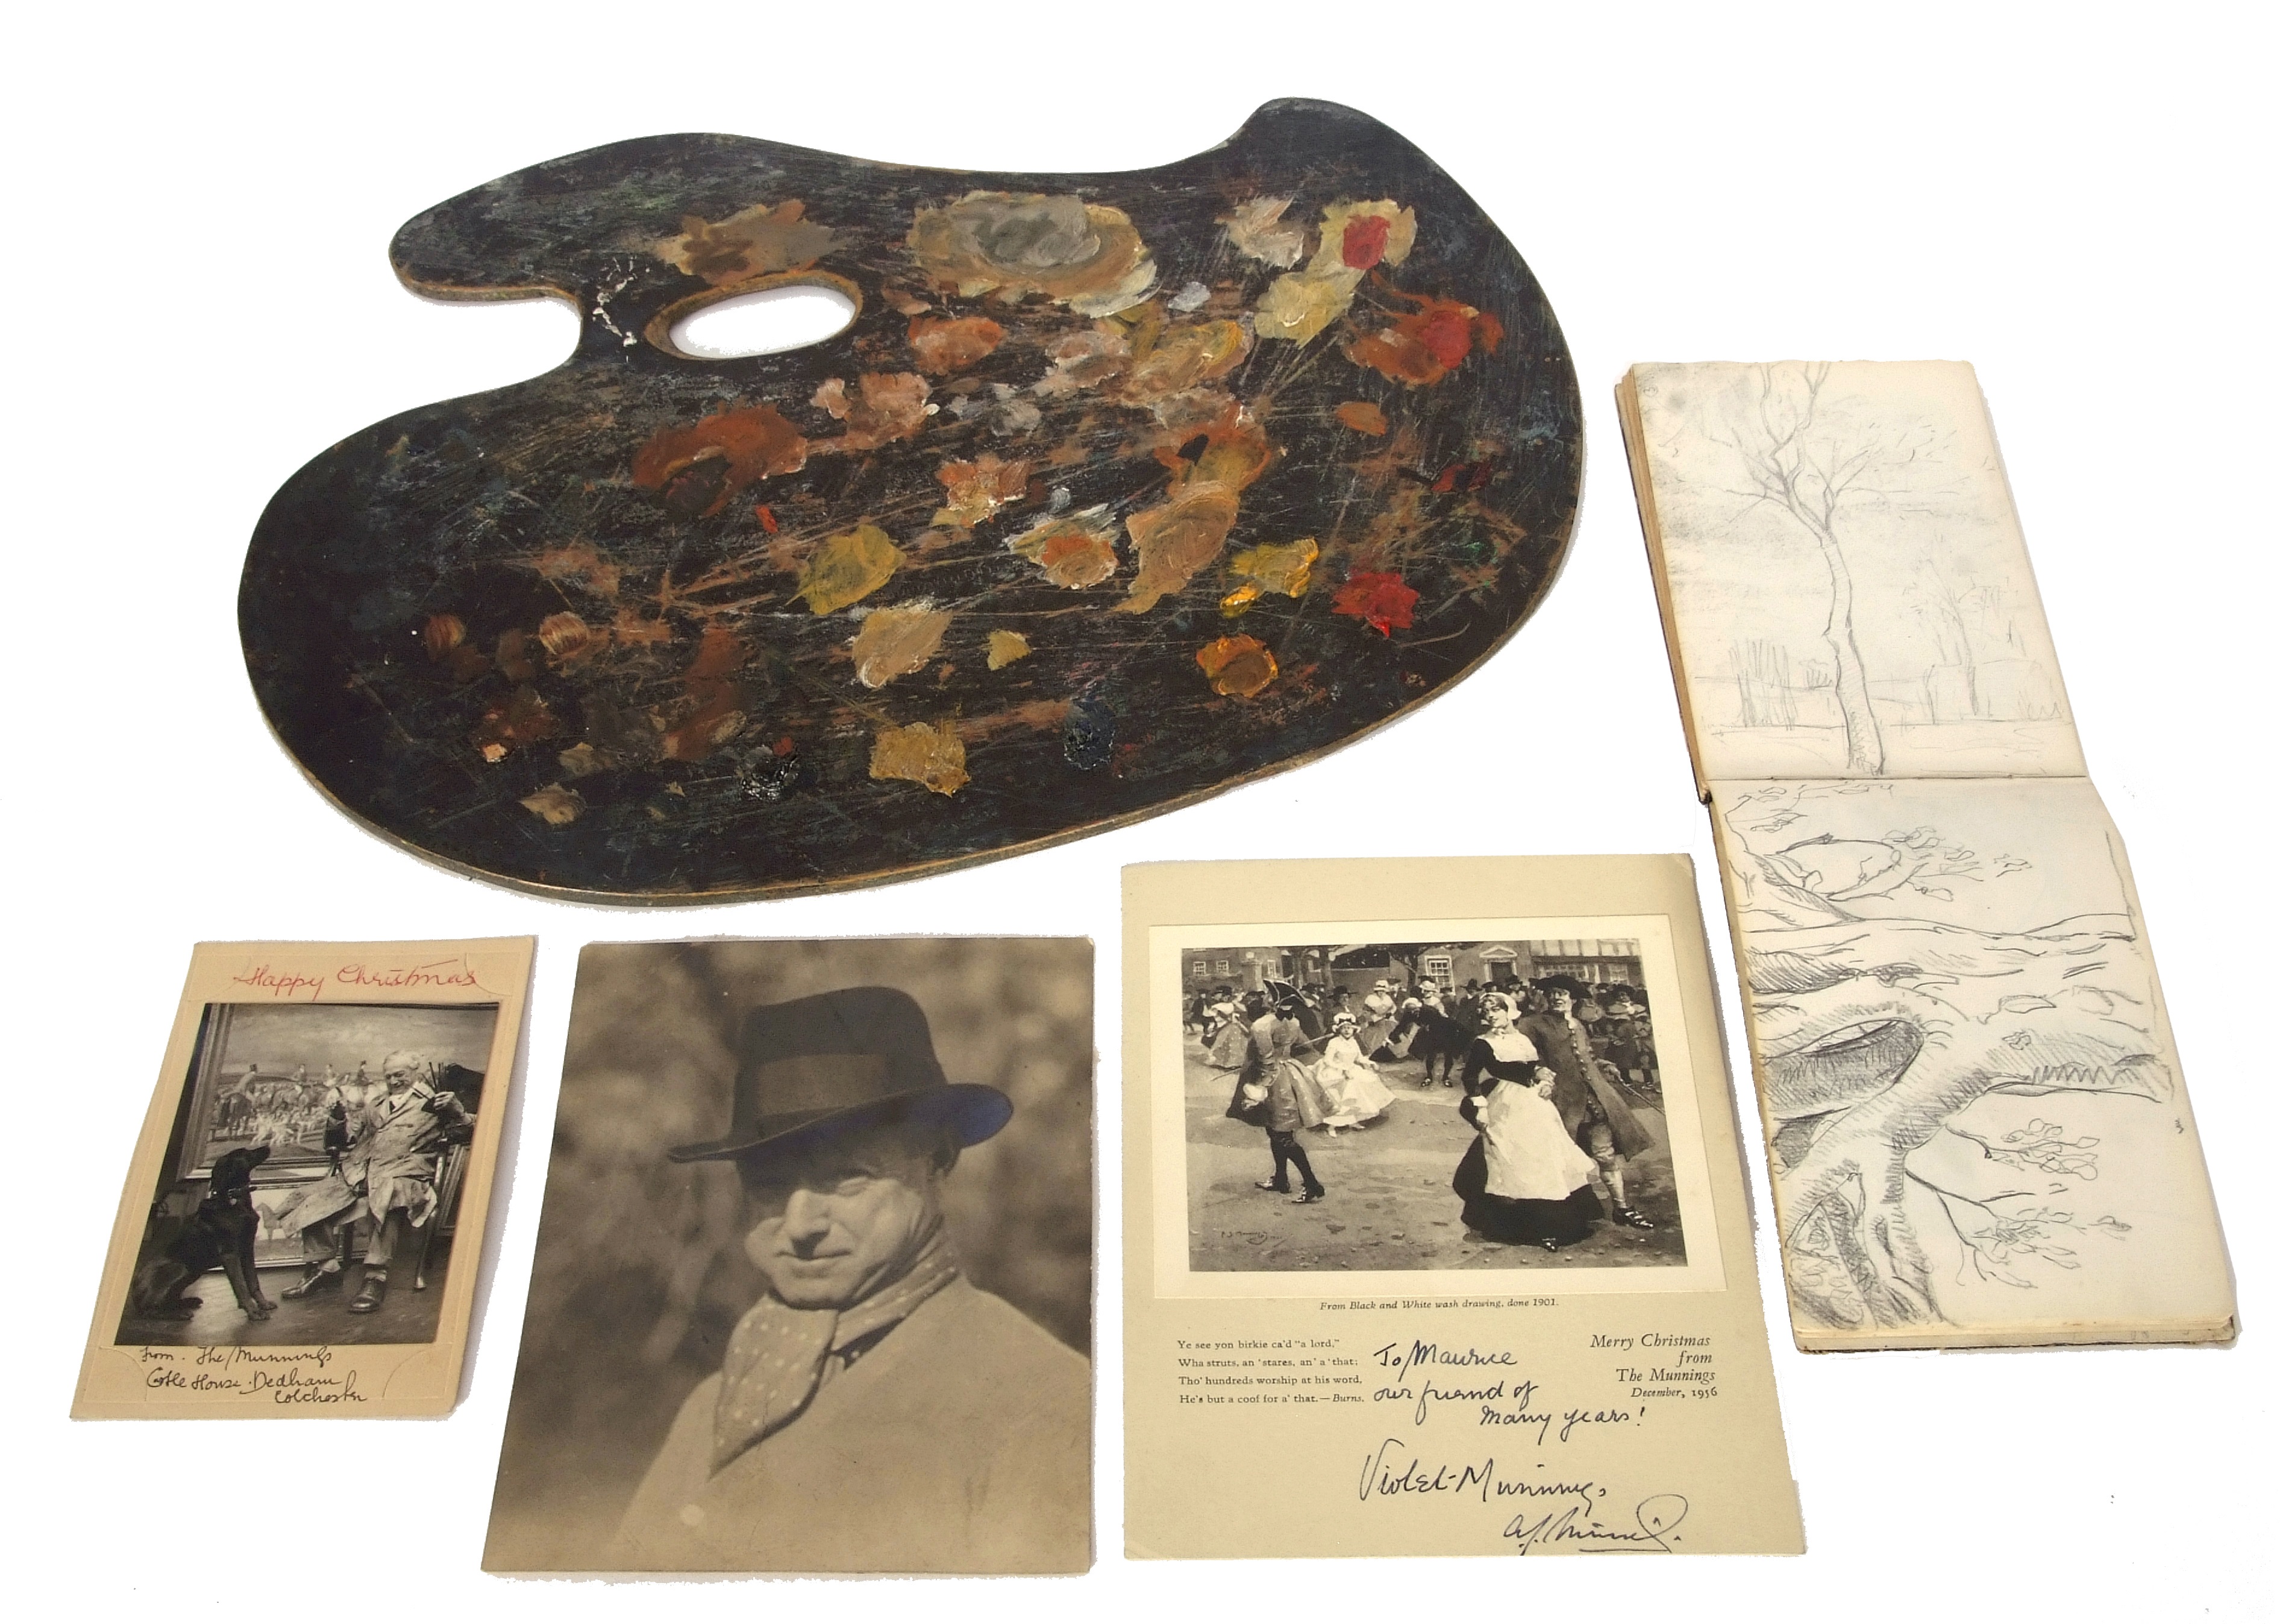 Extensive Personal Munnings Collection Up For Sale